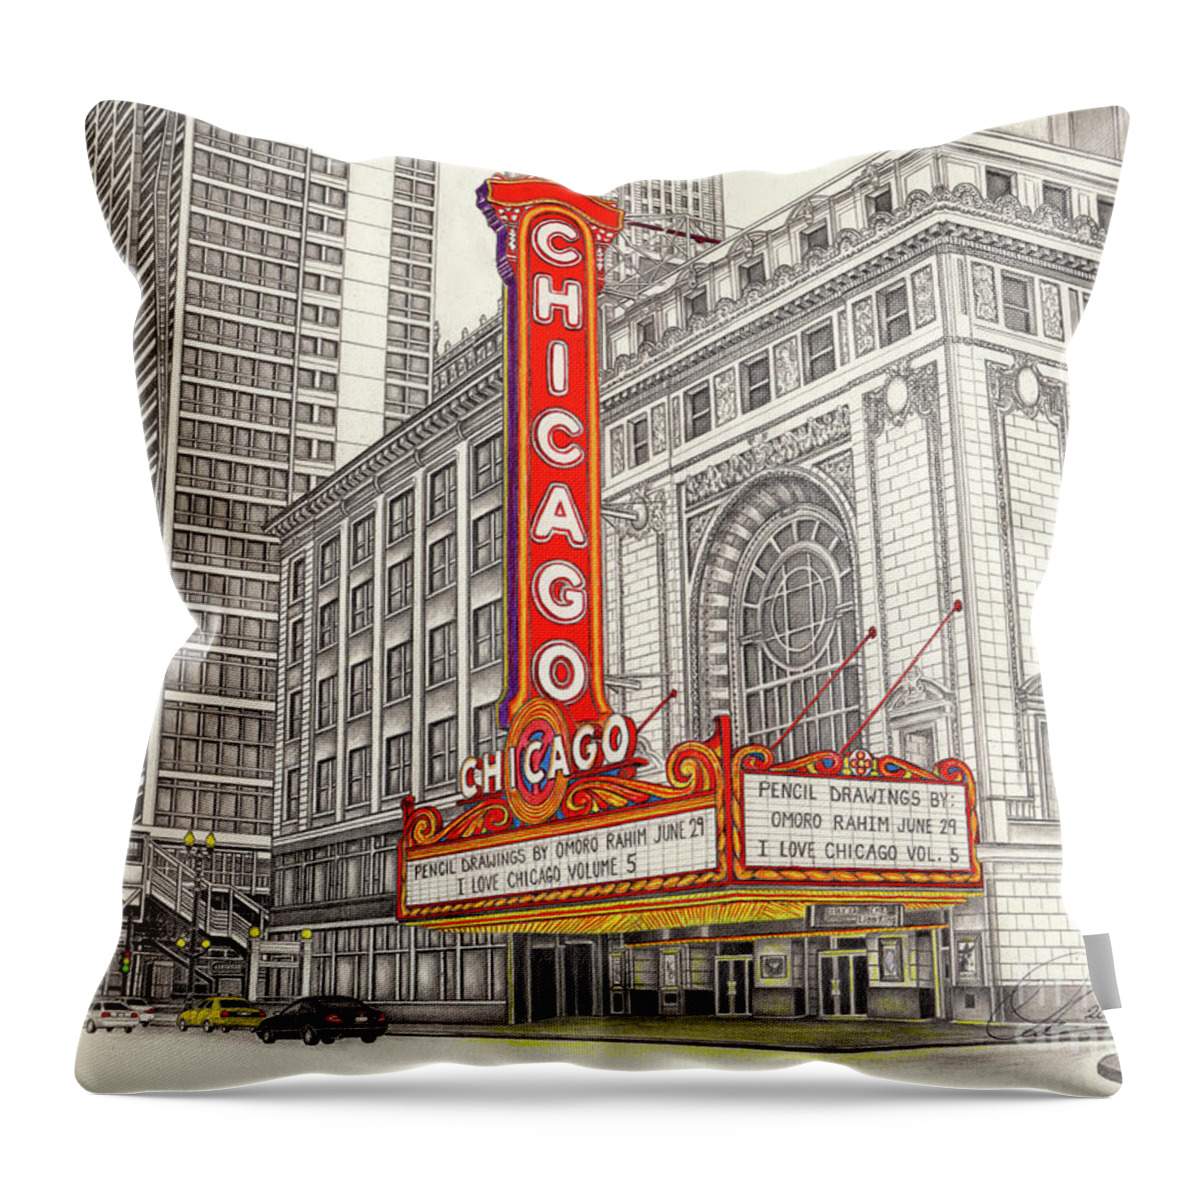 Chicagtheater Throw Pillow featuring the drawing Chicago Theater by Omoro Rahim